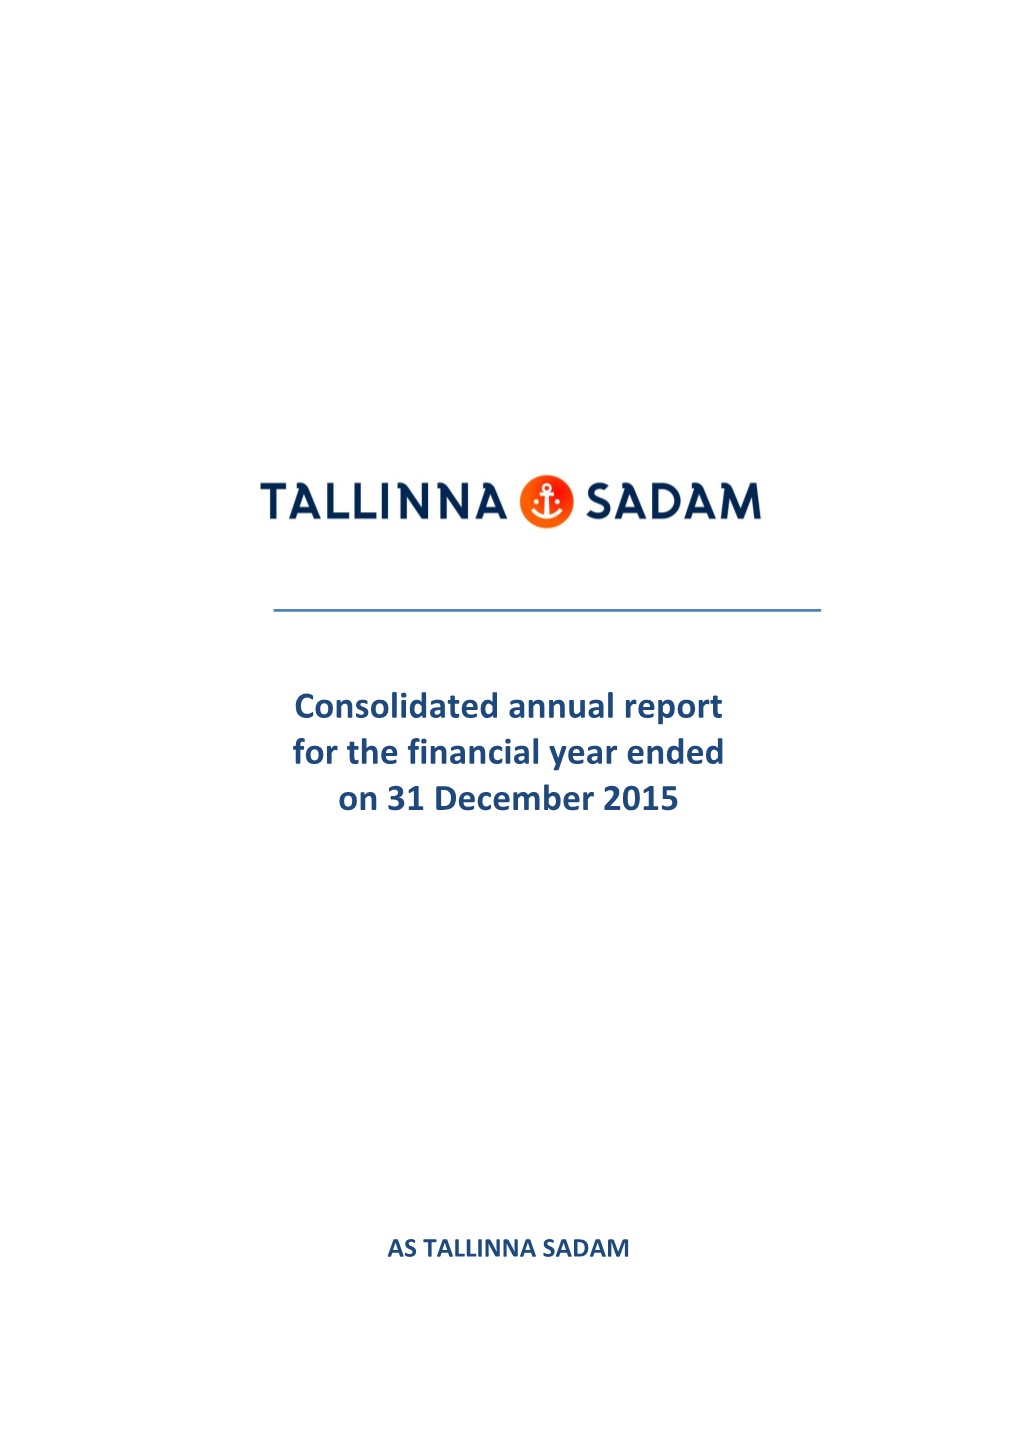 Consolidated Annual Report for the Financial Year Ended on 31 December 2015